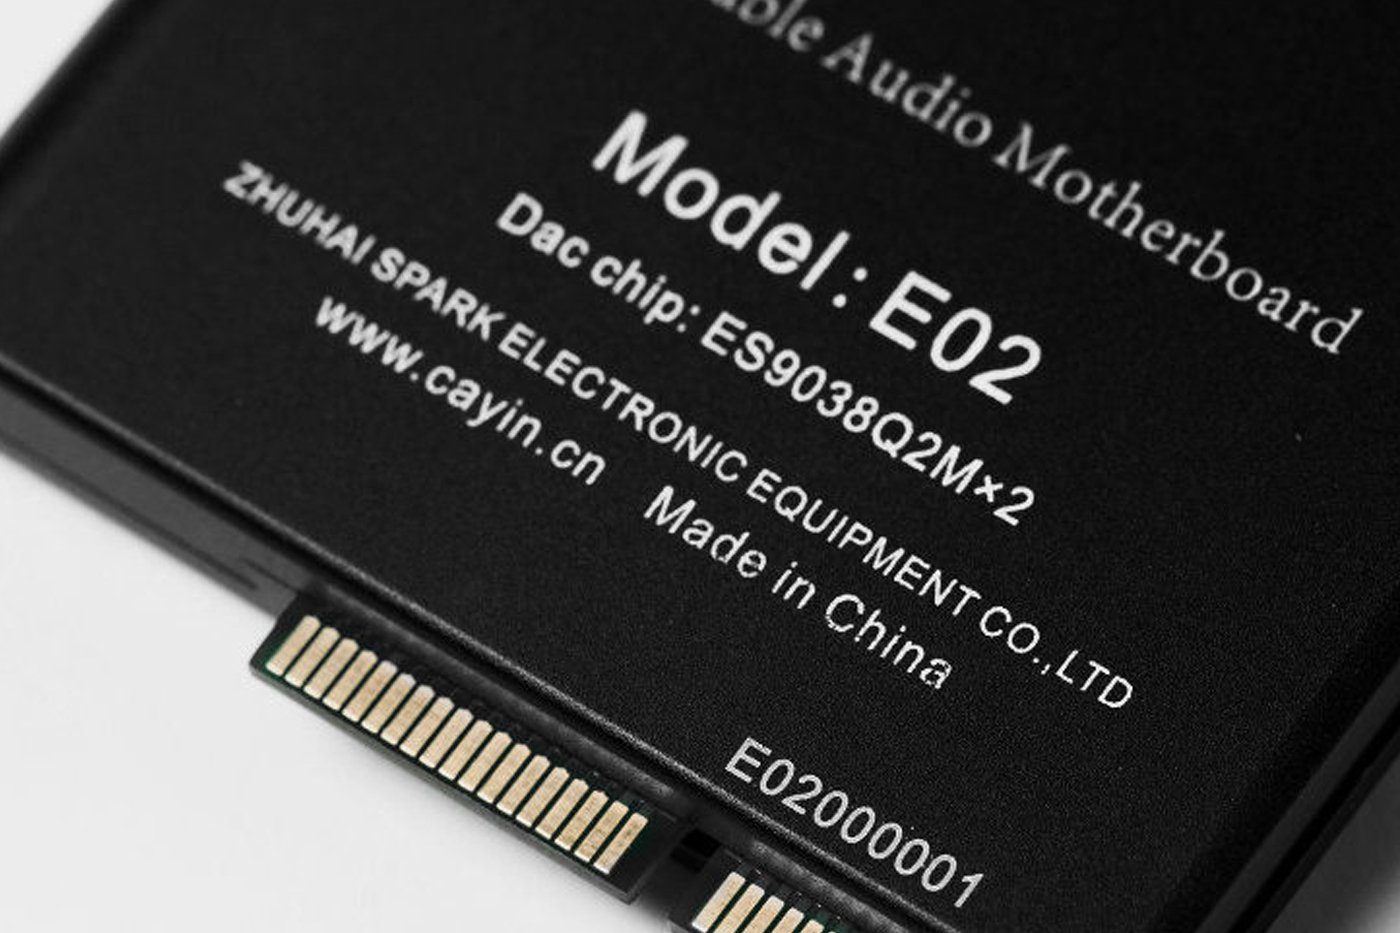 Cayin E02 Audio Motherboard Released!!